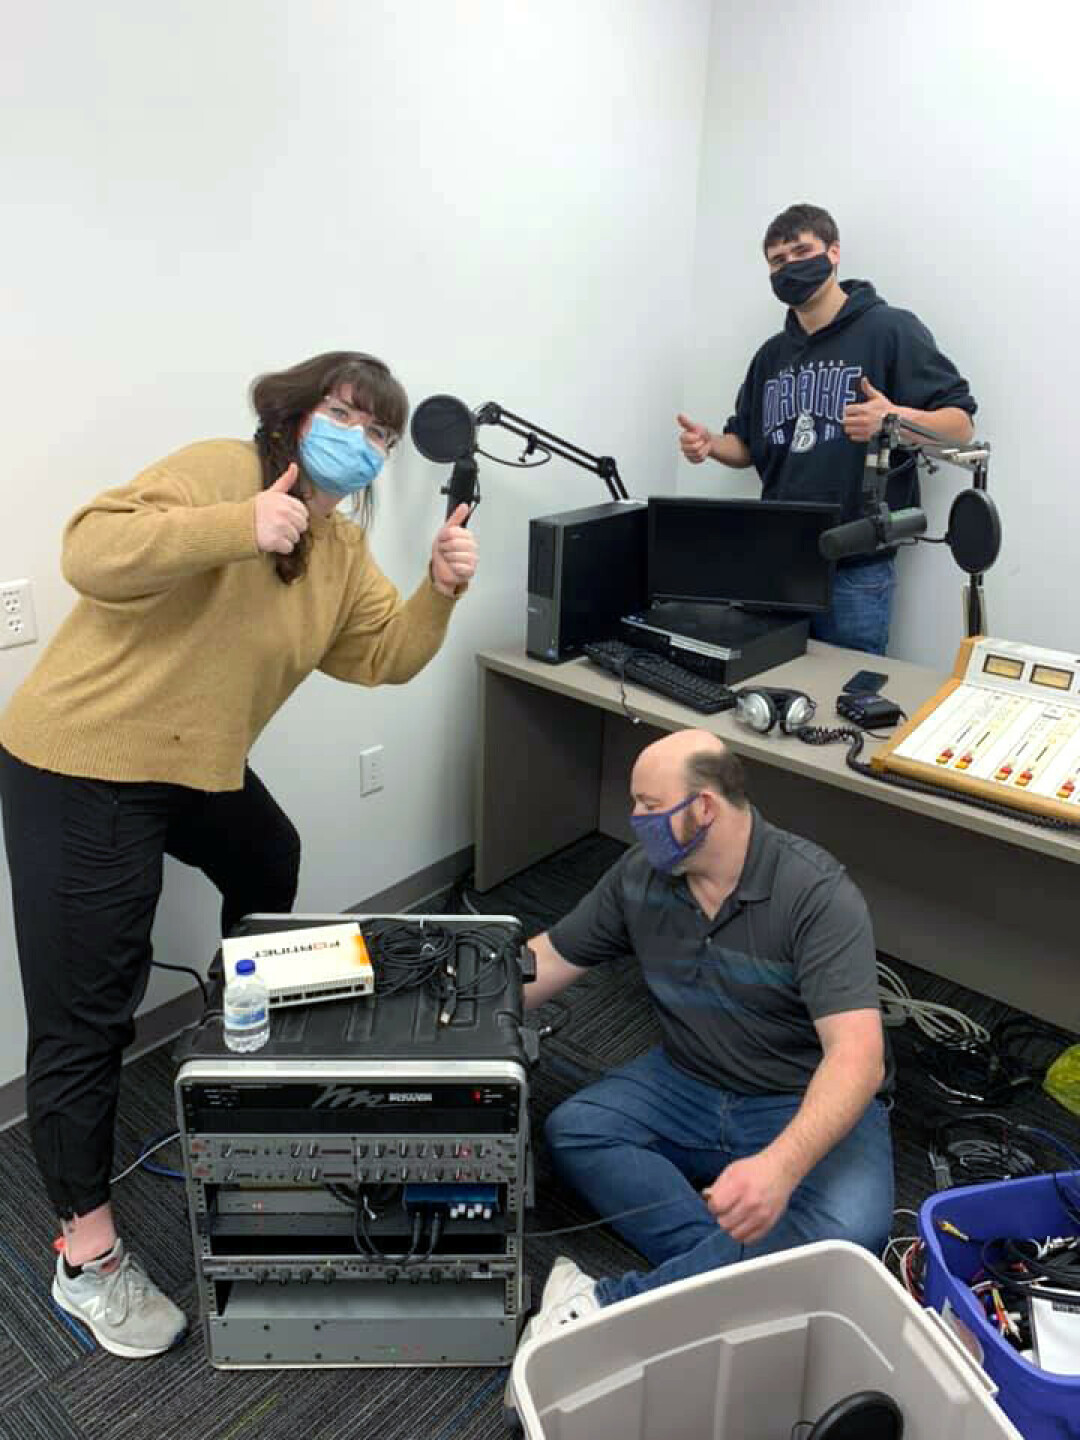 NEW HOME. Station Manager Ashley Wiswell, left, helps set up Converge's new studio inside the Pablo Center at the Confluence. (Photo via Facebook)